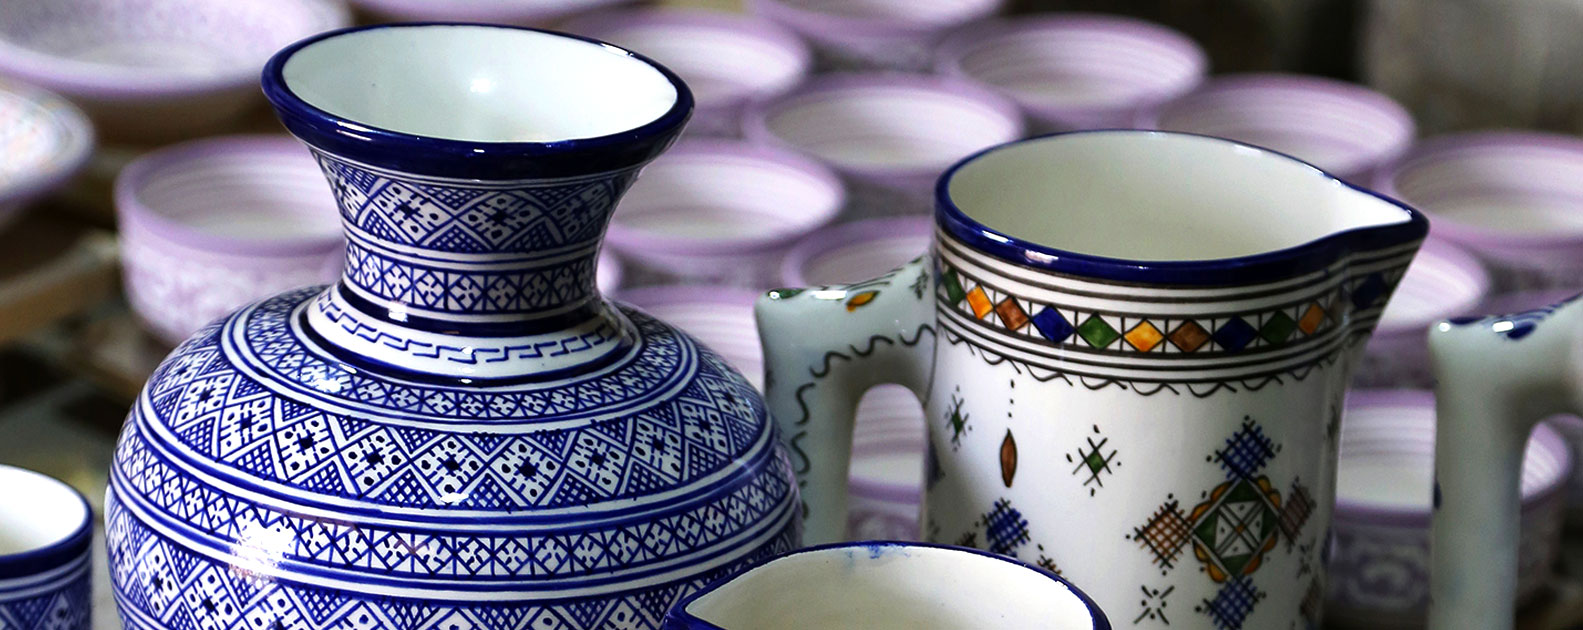 The Medina of Meknes, where traditional craftsmanship and modernity blend